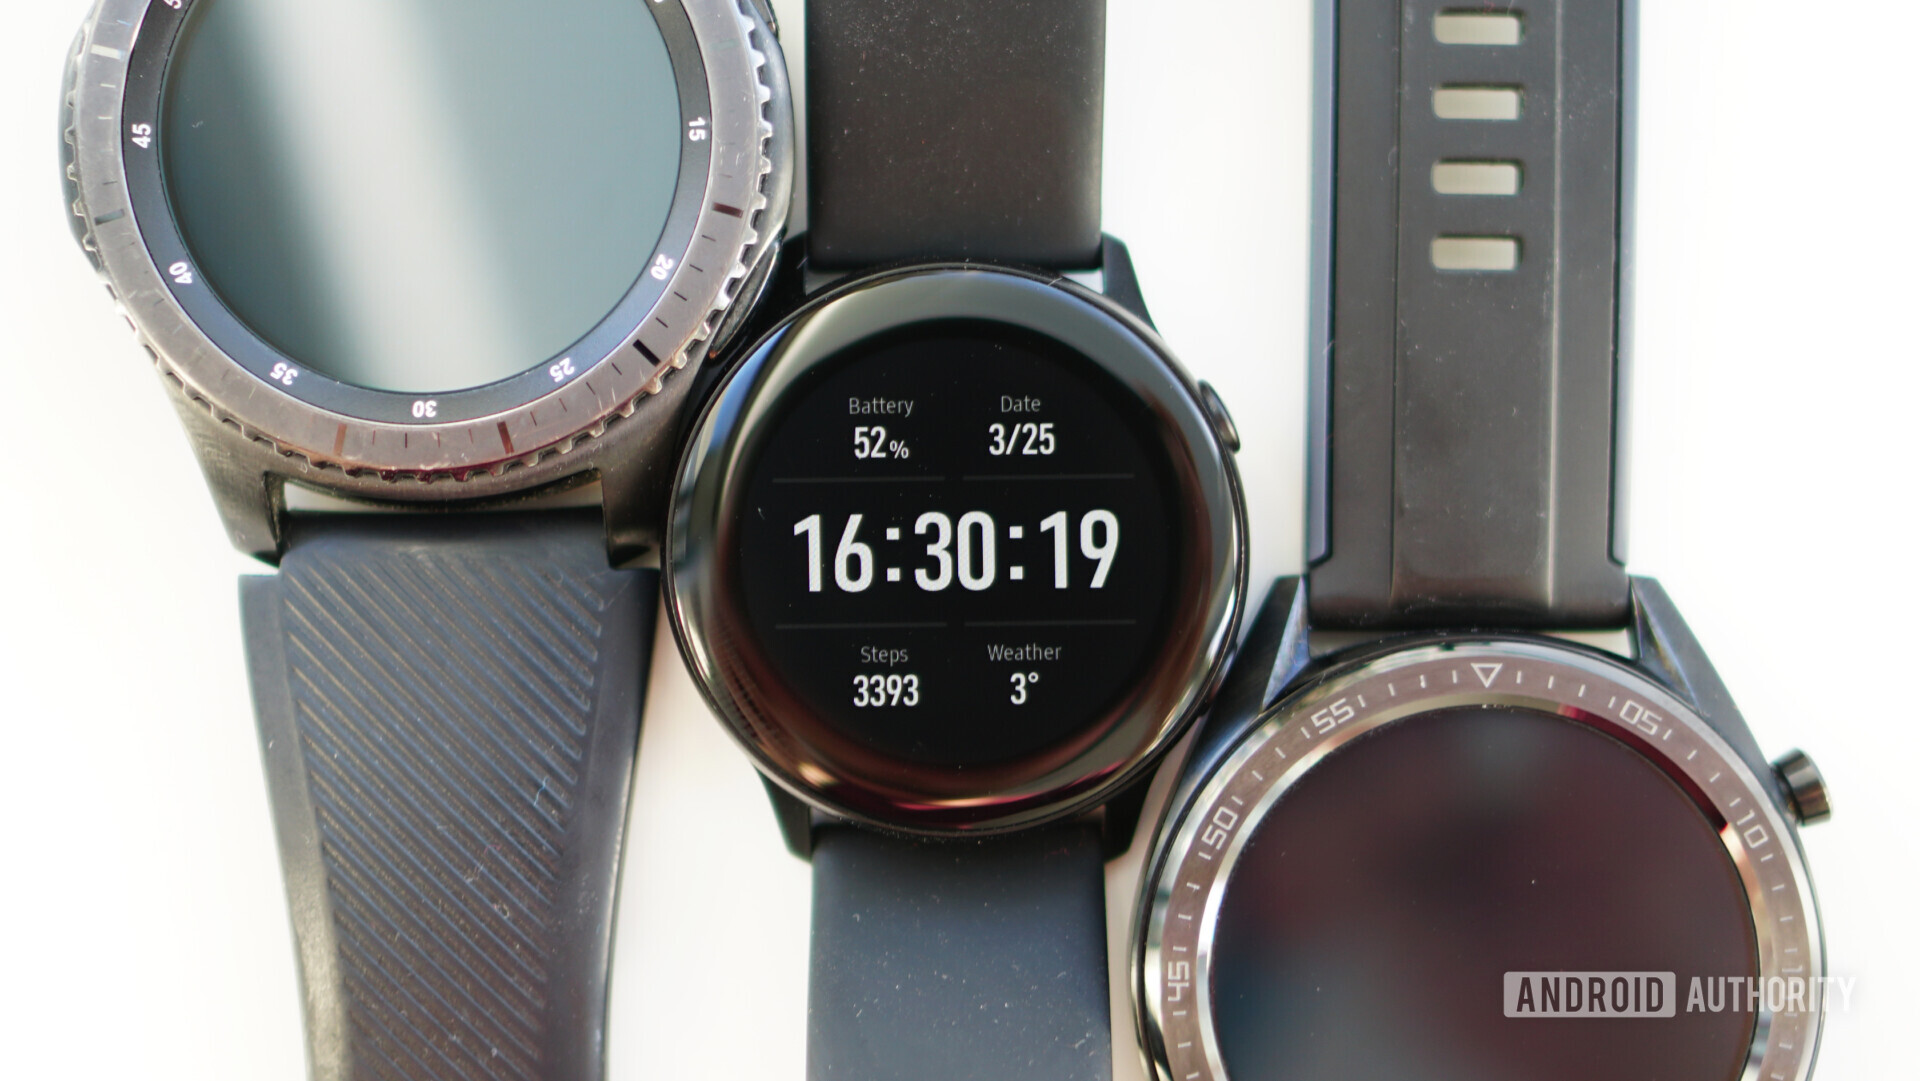 Samsung Galaxy Watch Active size comparison with Gear S3 Frontier and Huawei Watch GT